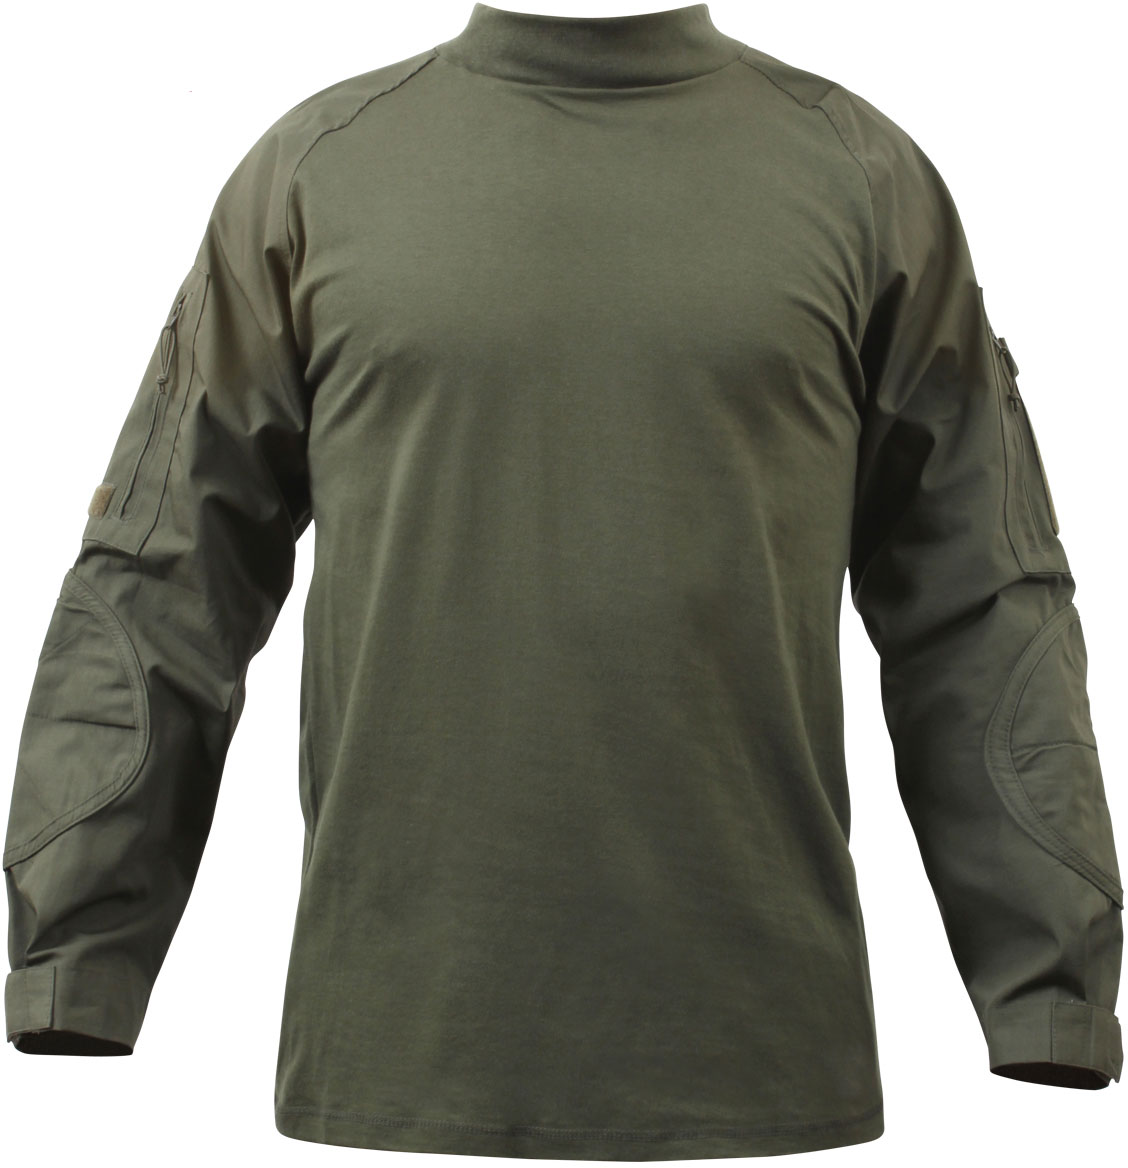 Rothco Olive Drab Lightweight Heat Resistant Military FR NYCO Combat Shirt